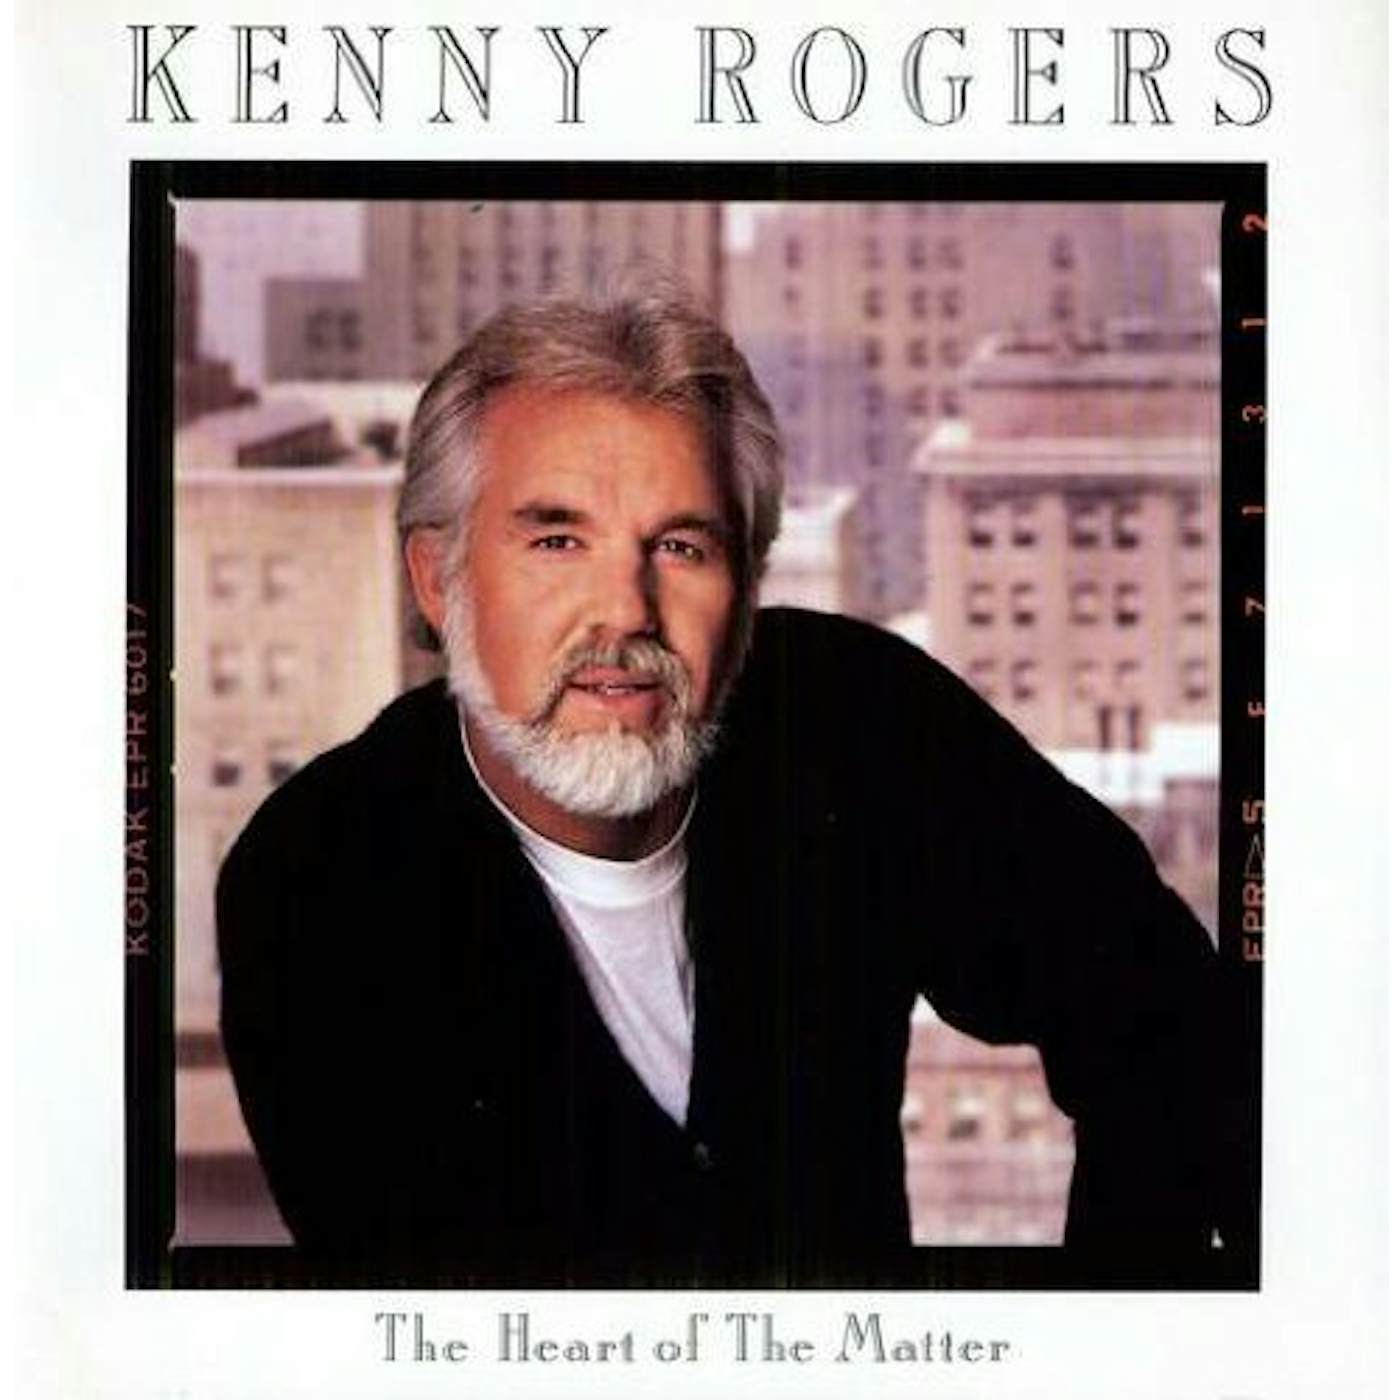 Kenny Rogers HEART OF THE MATTER Vinyl Record